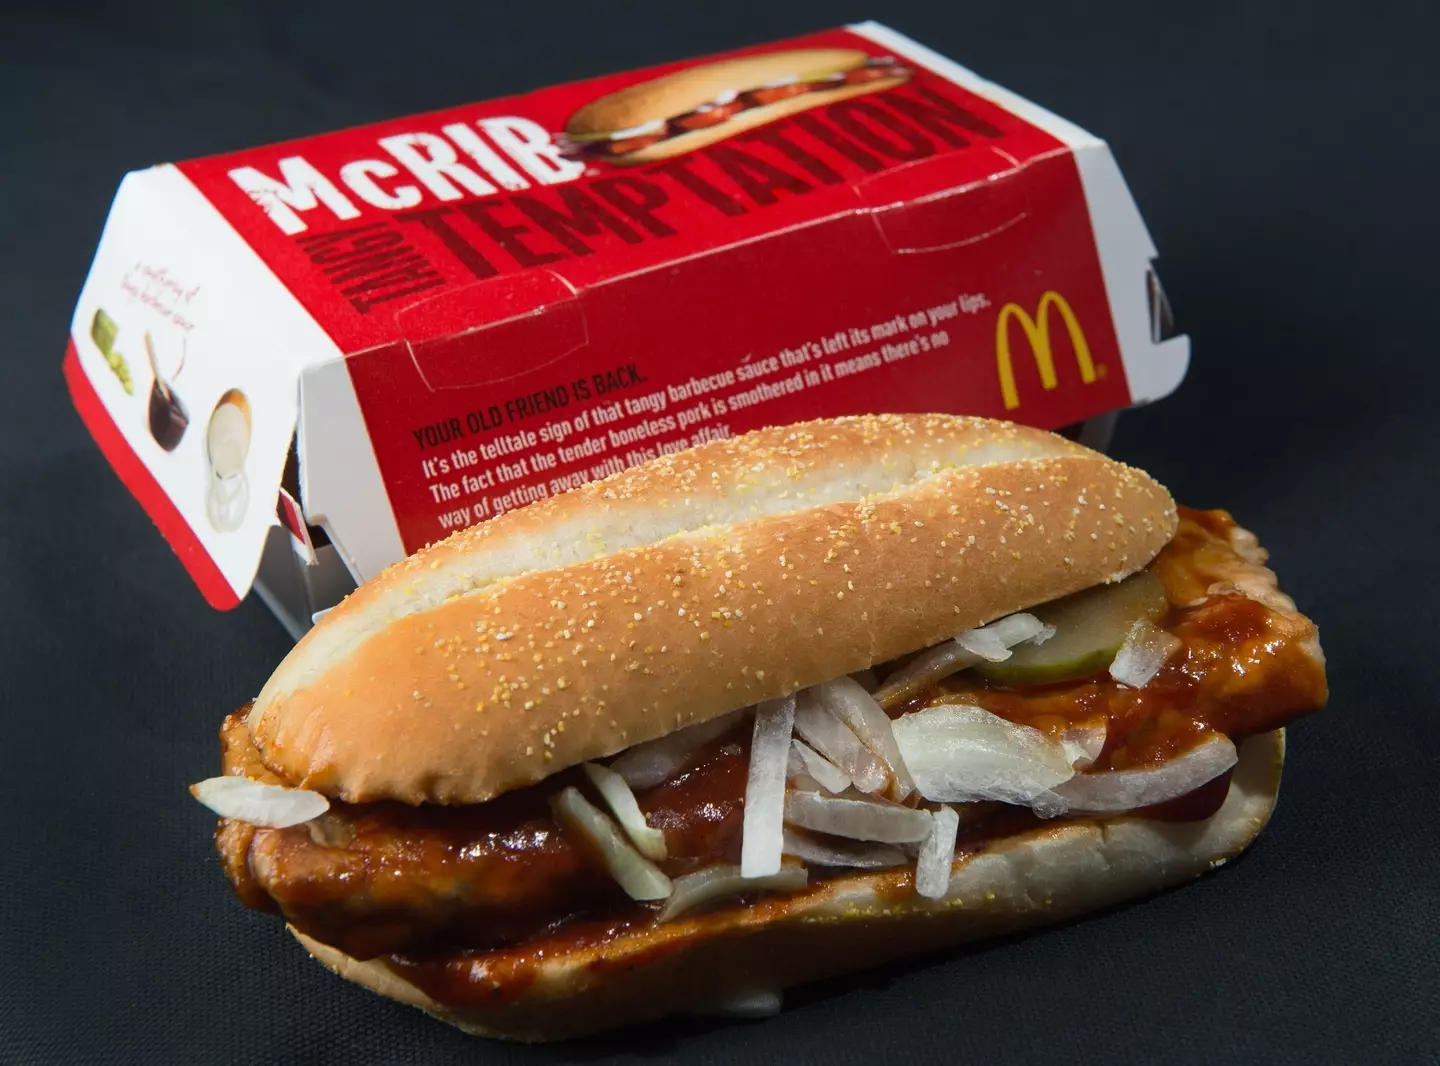 Mike doesn't think the McRib will become a permanent menu item.